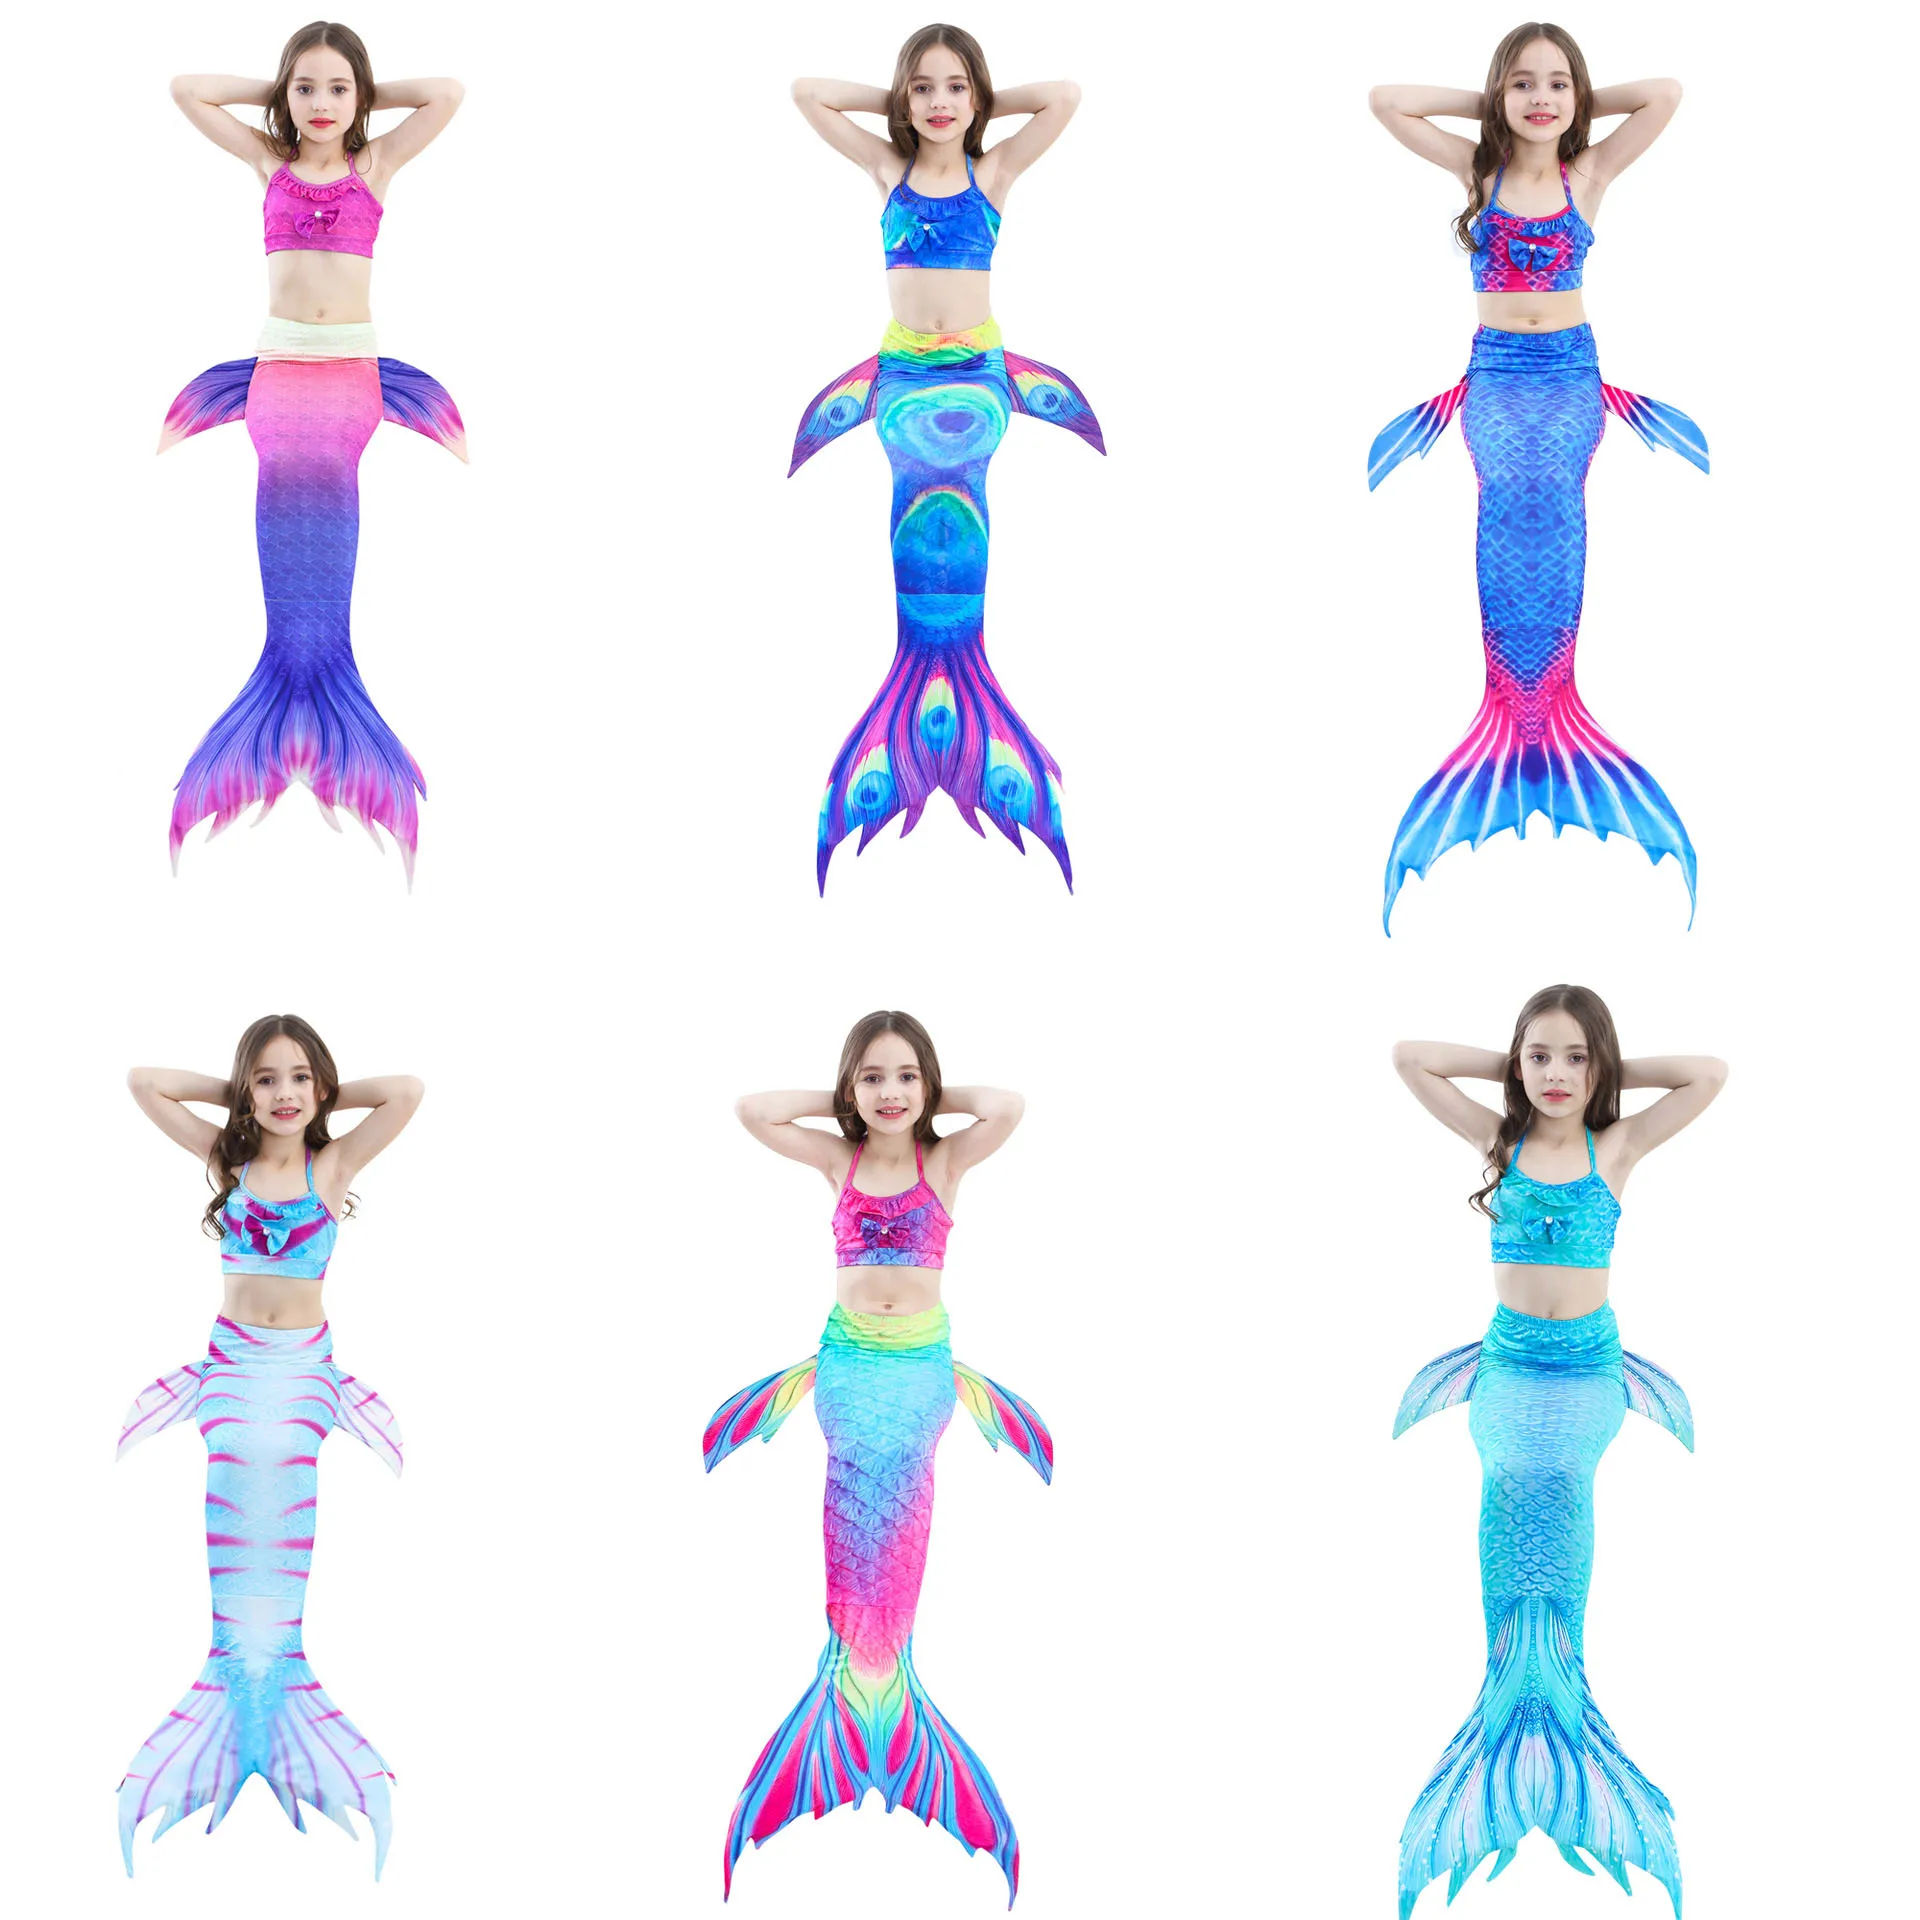 

Kids Swimmable Mermaid Tail for Girls Swimming Bating Suit Mermaid Costume for Child Swimsuit Can Add Monofin Fin Goggle Garland